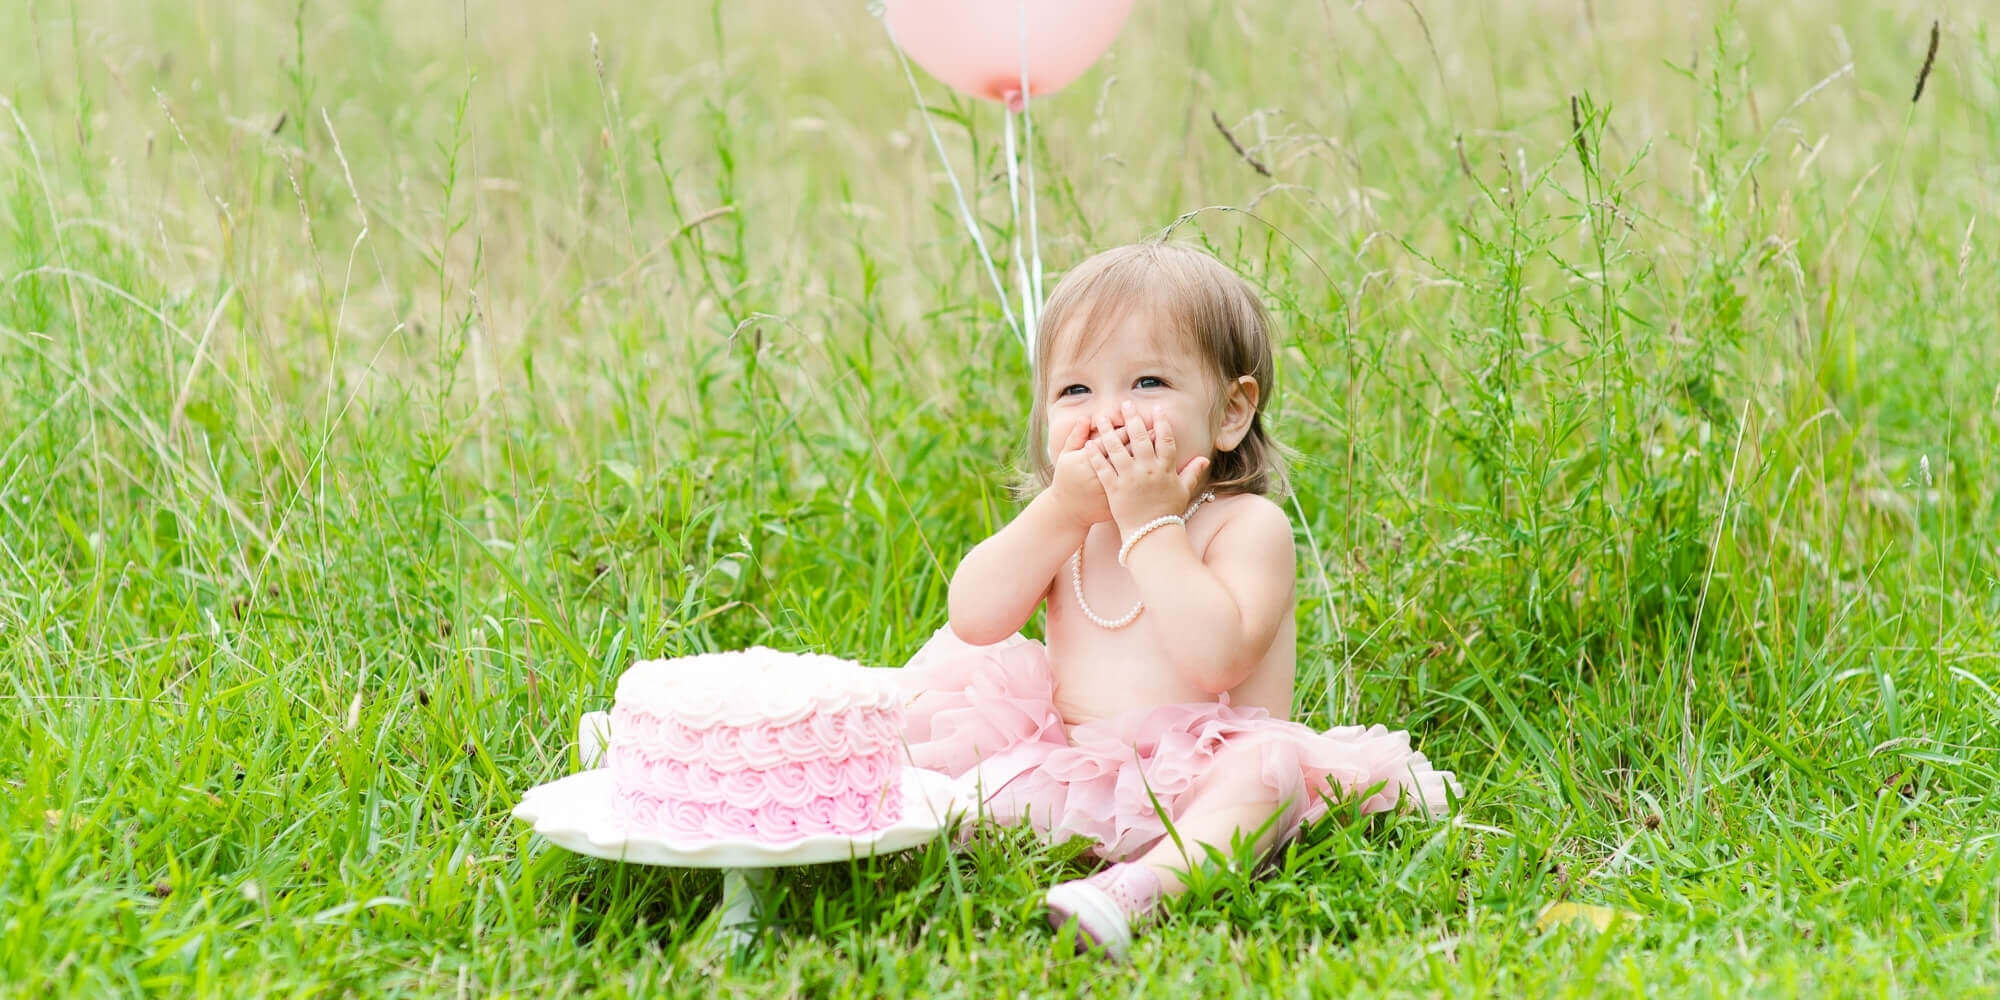 100+ First Birthday Wishes for a Baby Girl